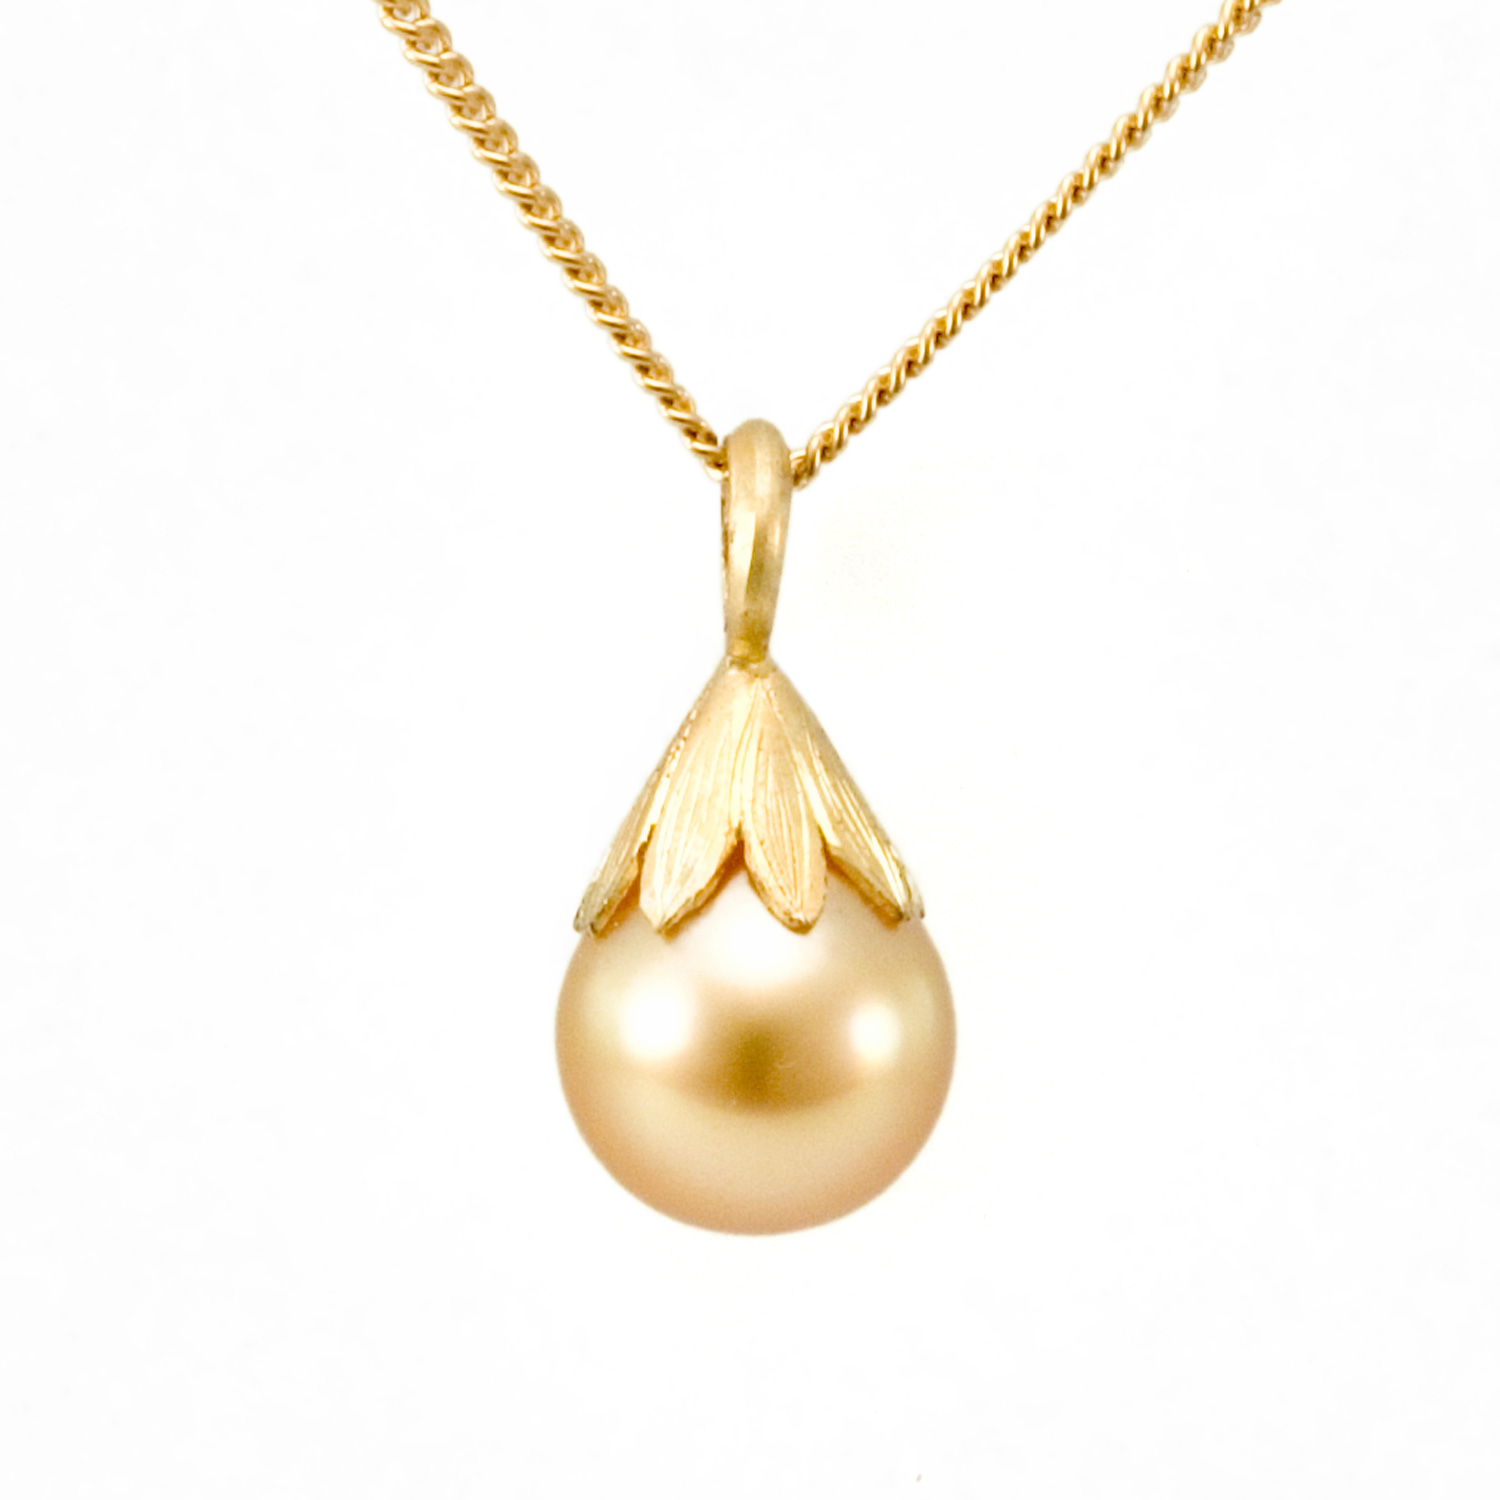 Golden South Sea Pearl Drop Pendant in 18k gold by Tamberlaine